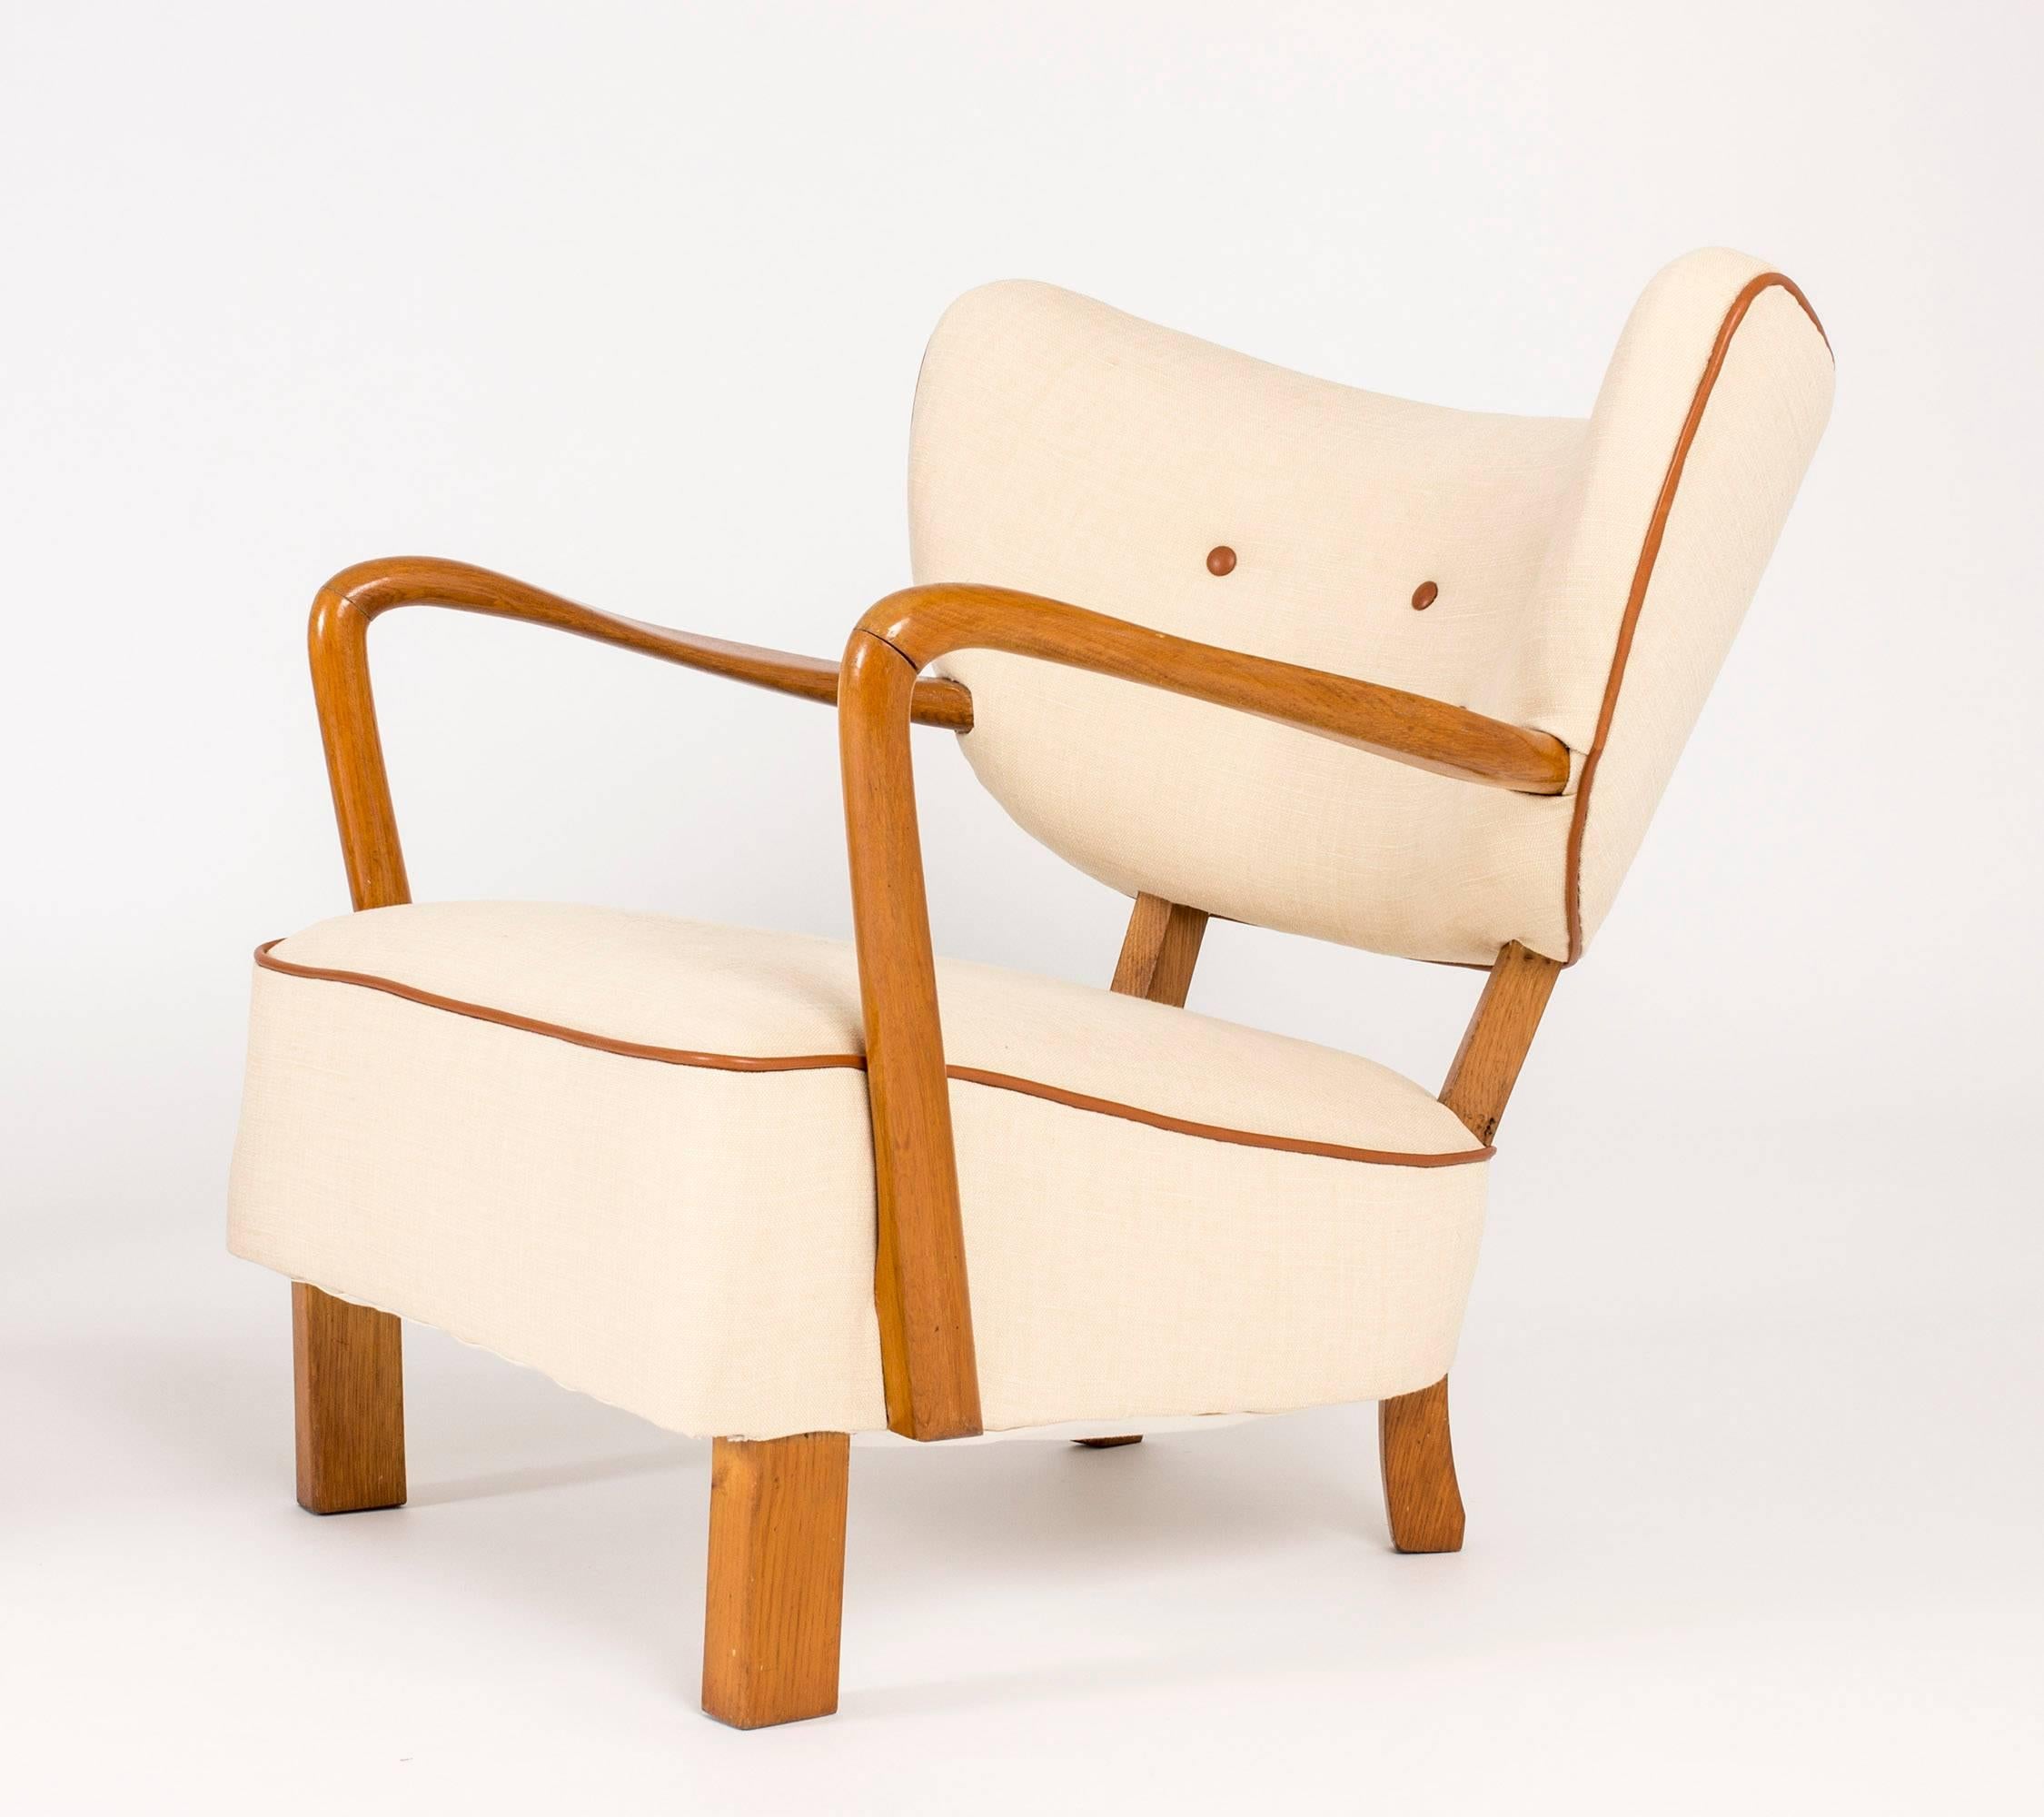 Pair of Lounge Chairs by Viggo Boesen 1